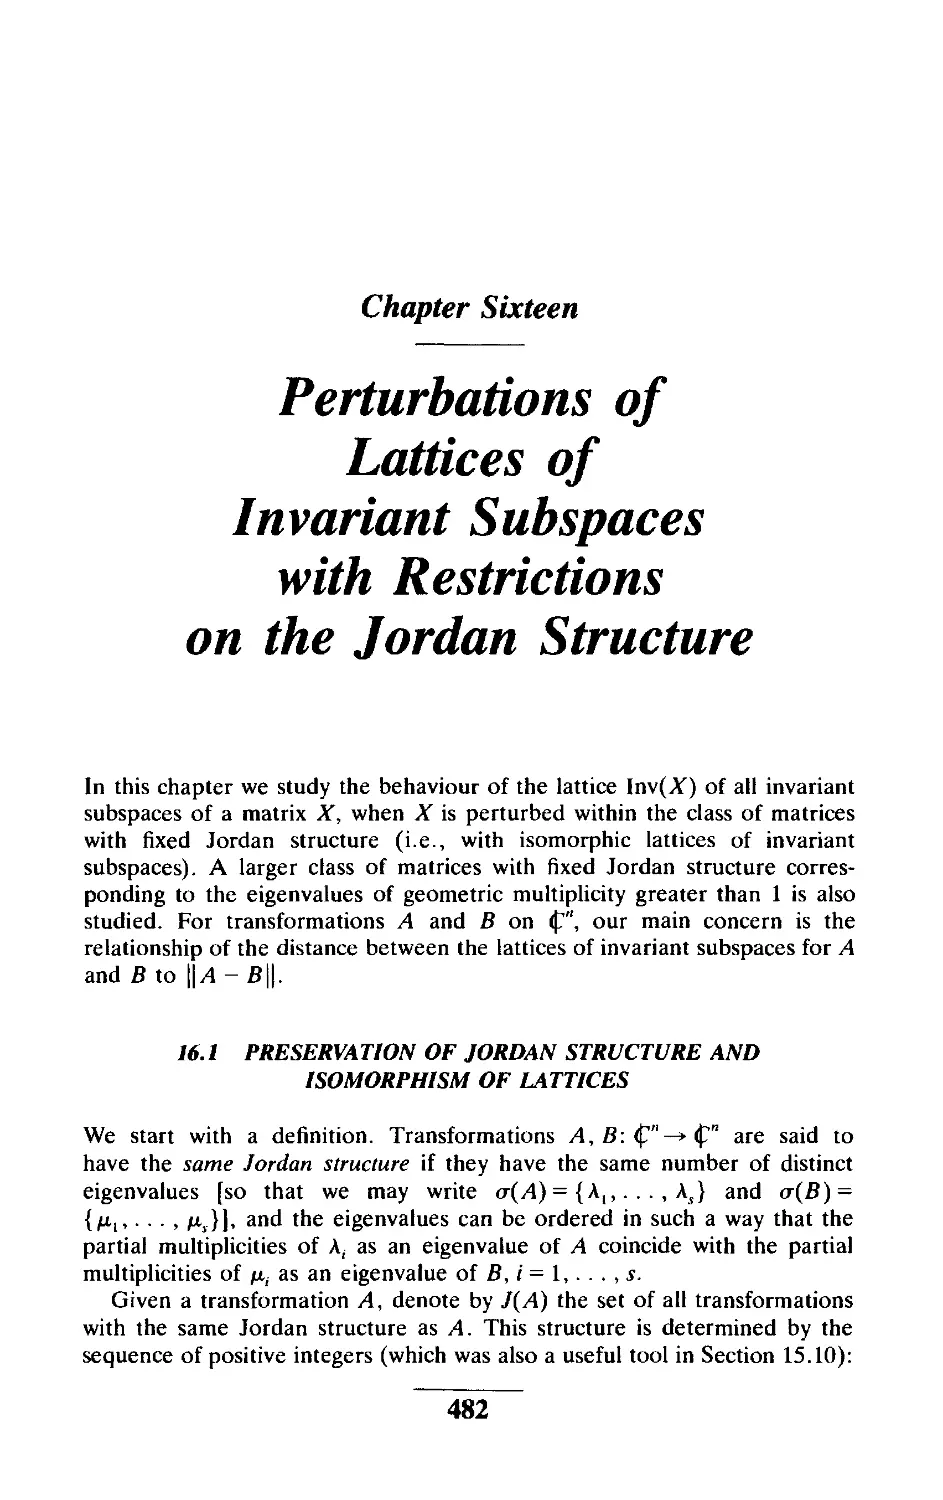 Chapter Sixteen Perturbations of Lattices of Invariant Subspaces with Restrictions on the Jordan Structure